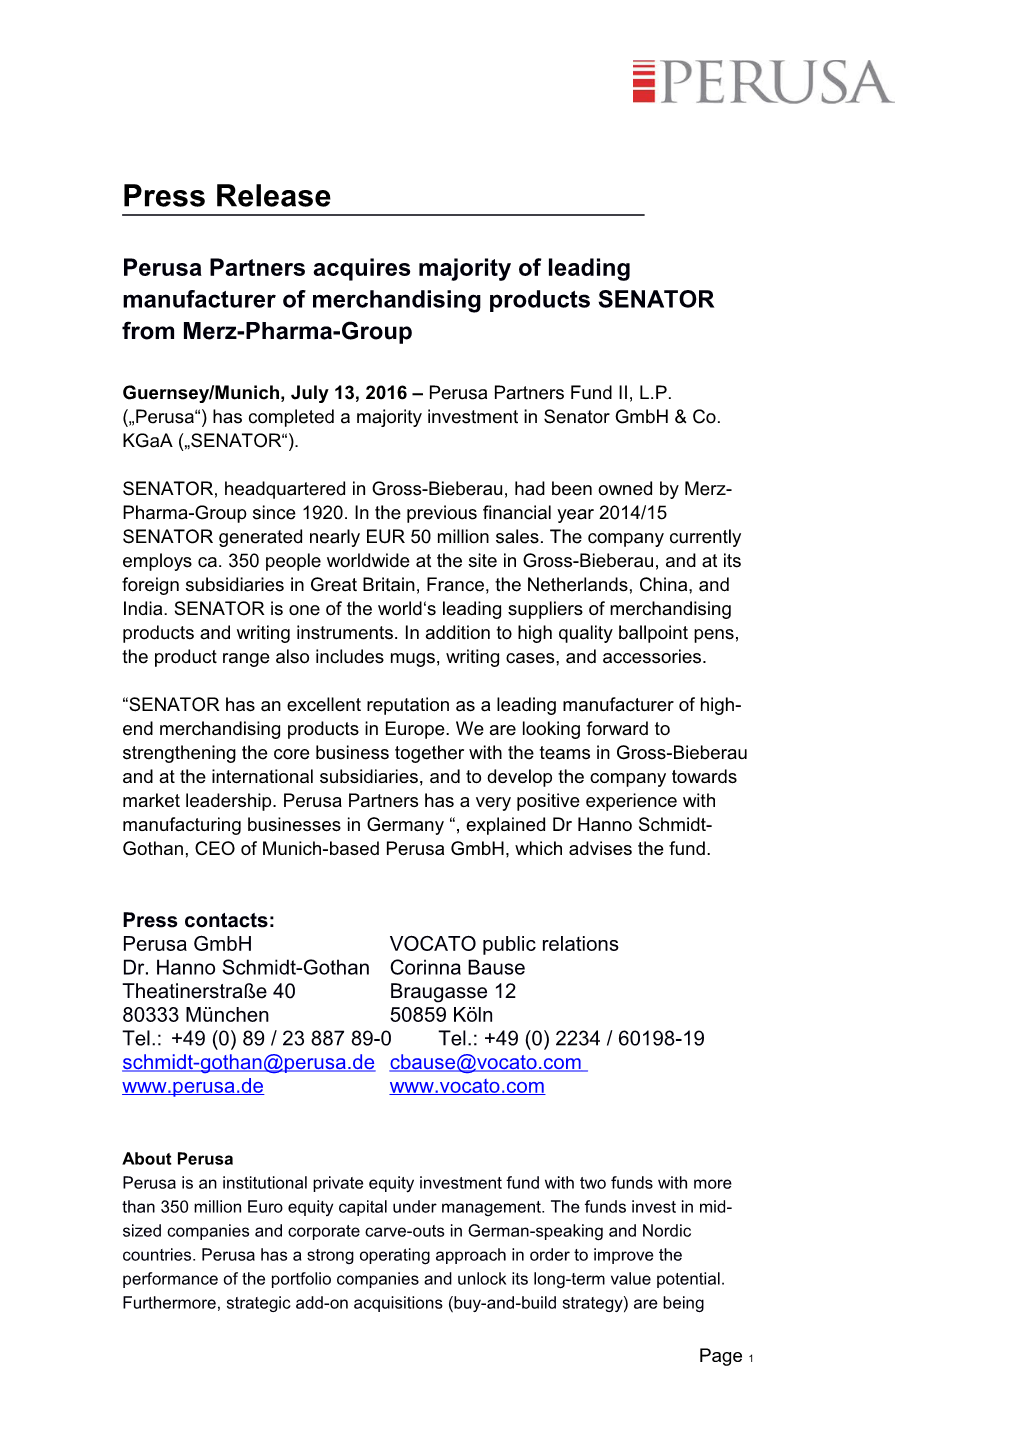 Perusa Partners Acquires Majority of Leading Manufacturer of Merchandising Products SENATOR